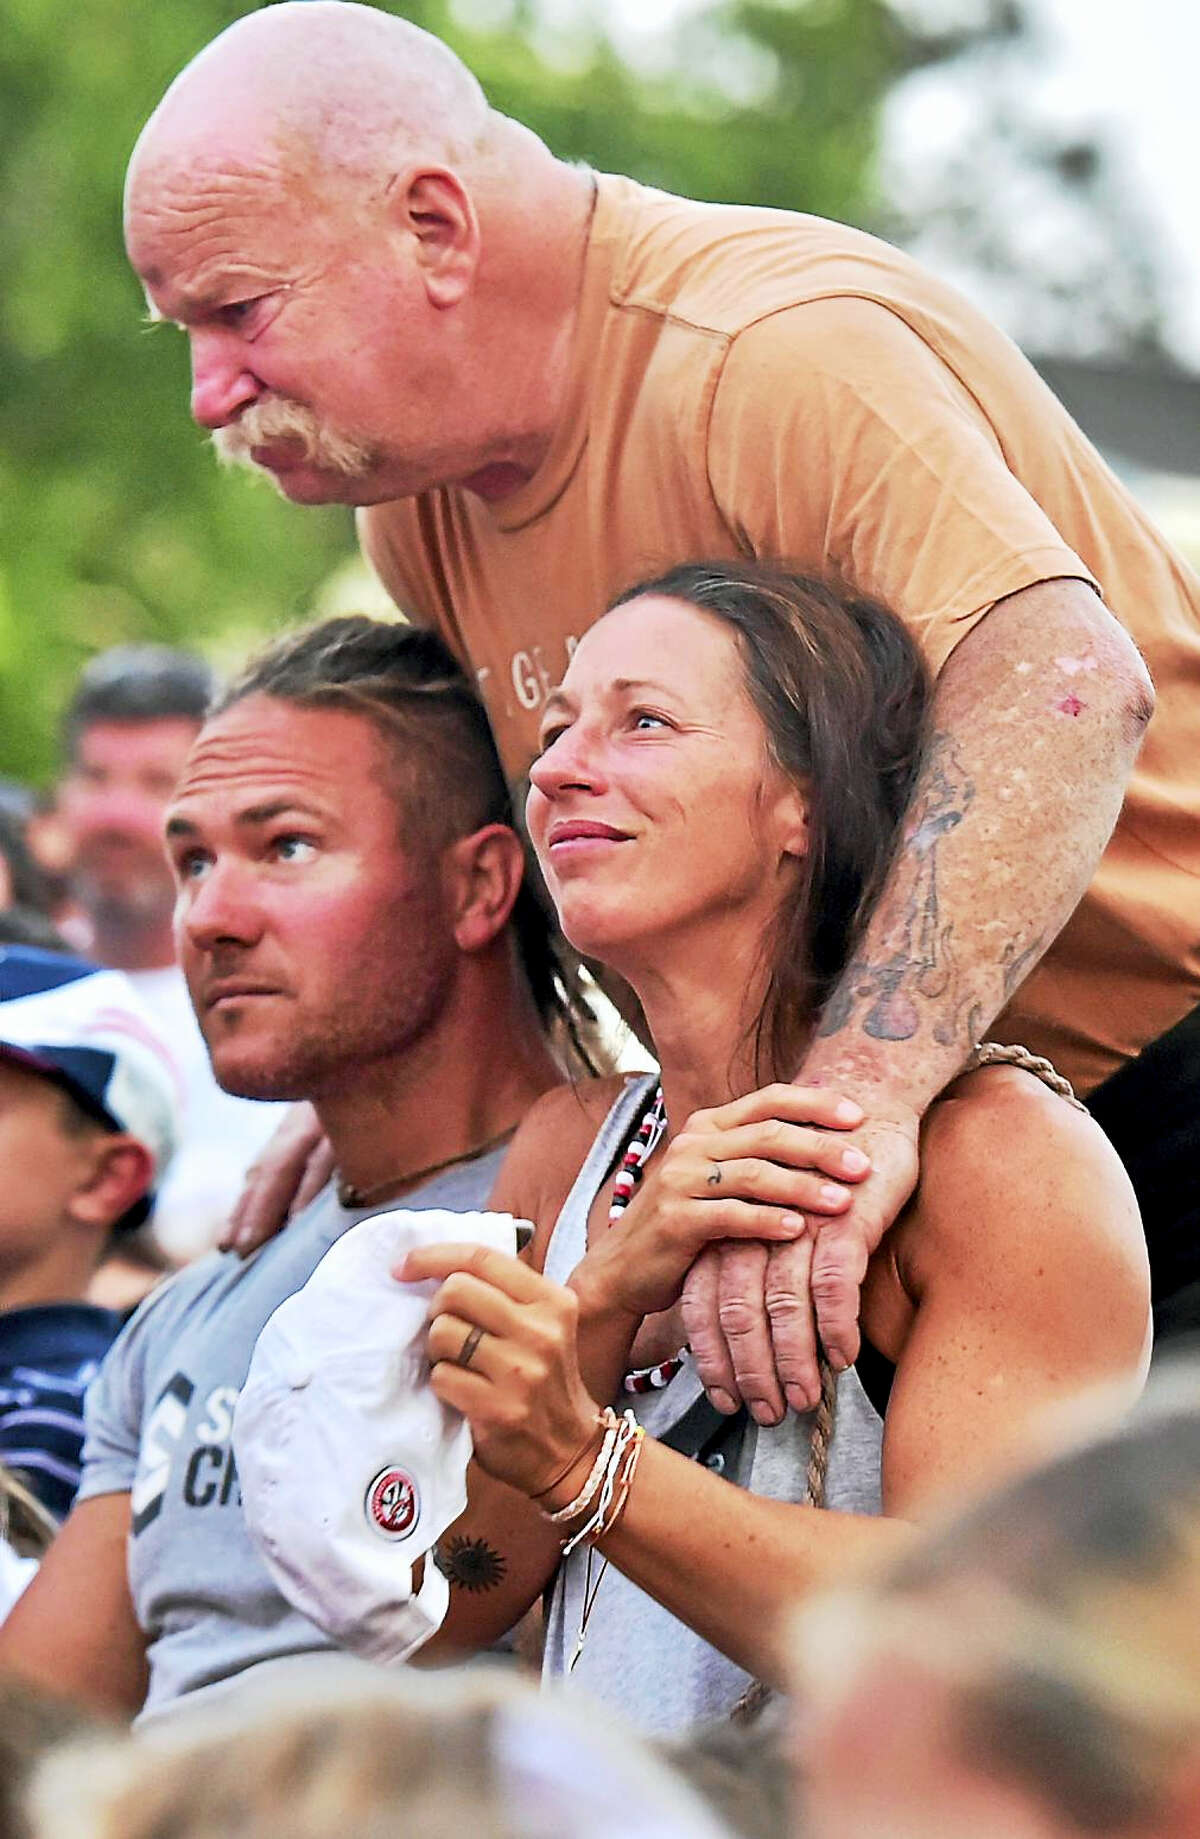 (Peter Hvizdak - Hearst Connecticut Media) Dave and Paula Callahan, the parents of drowning victim Ben Callahan, 10, of Branford, are hugged by friend William “Bones” Burkhardt of Madison during a candlelight vigil for Ben on the Branford Green.